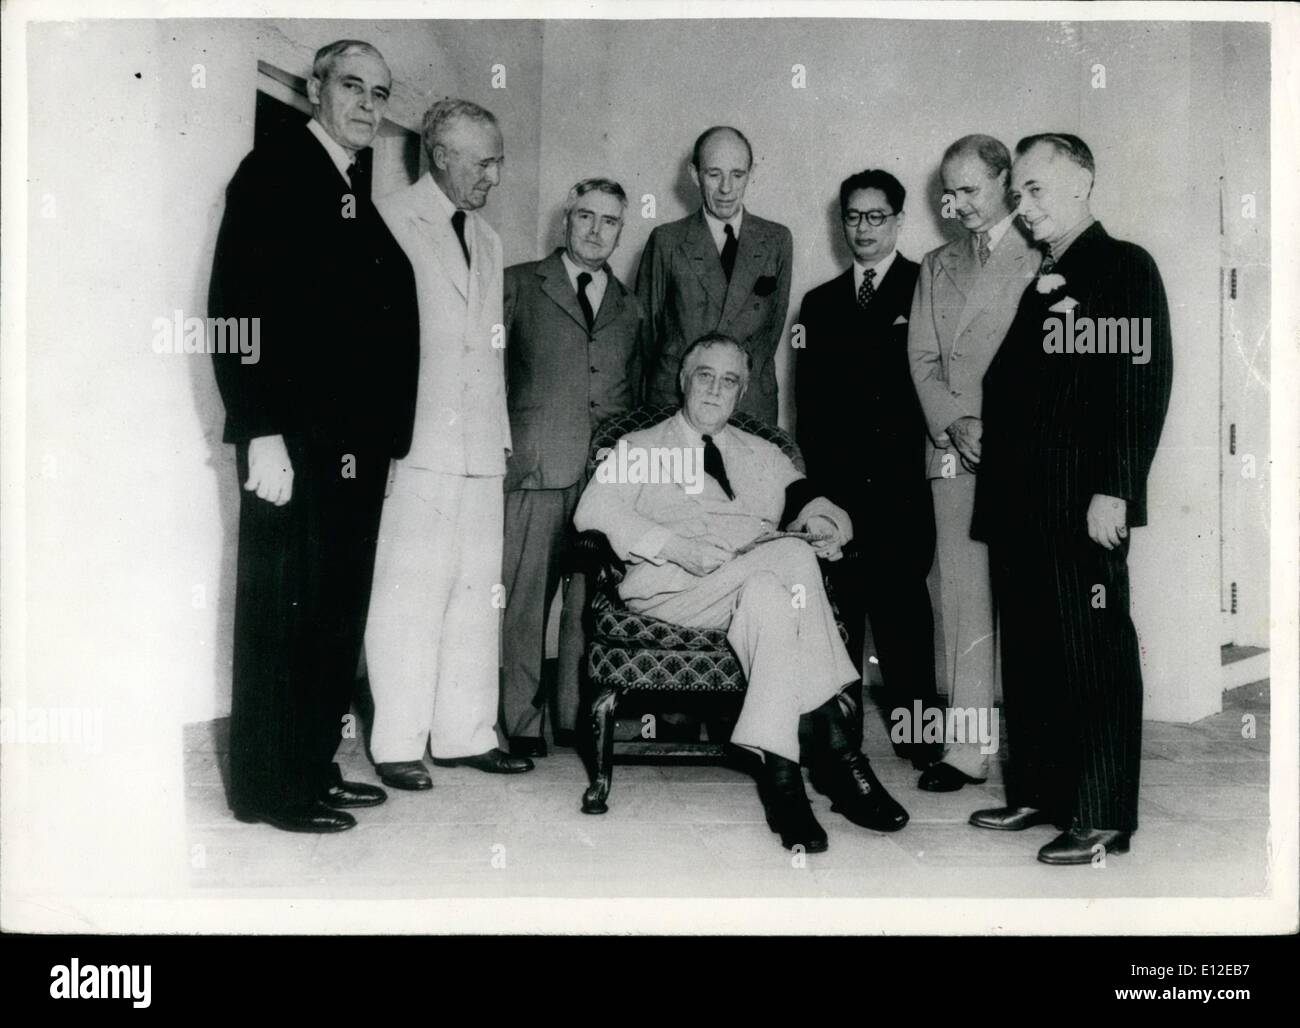 Dec. 16, 2011 - President and Pacific was council: Photo shows President Roosevelt, seen seated as members of the Pacific War Council stand rounf in a group at the White House. The Pacific War Council , is held a ''Round the World'' Conference, which included particular exploration of the situation in China and India and their ''Relationship to Japan''. The group (L to R). Sir Owen Dixon, of Australia; Leighton McCarthy, of Canada; Walter Nash of New Zealand; Lord Halifax, Dr. T.V. Soong, of China; Dr. A Stock Photo